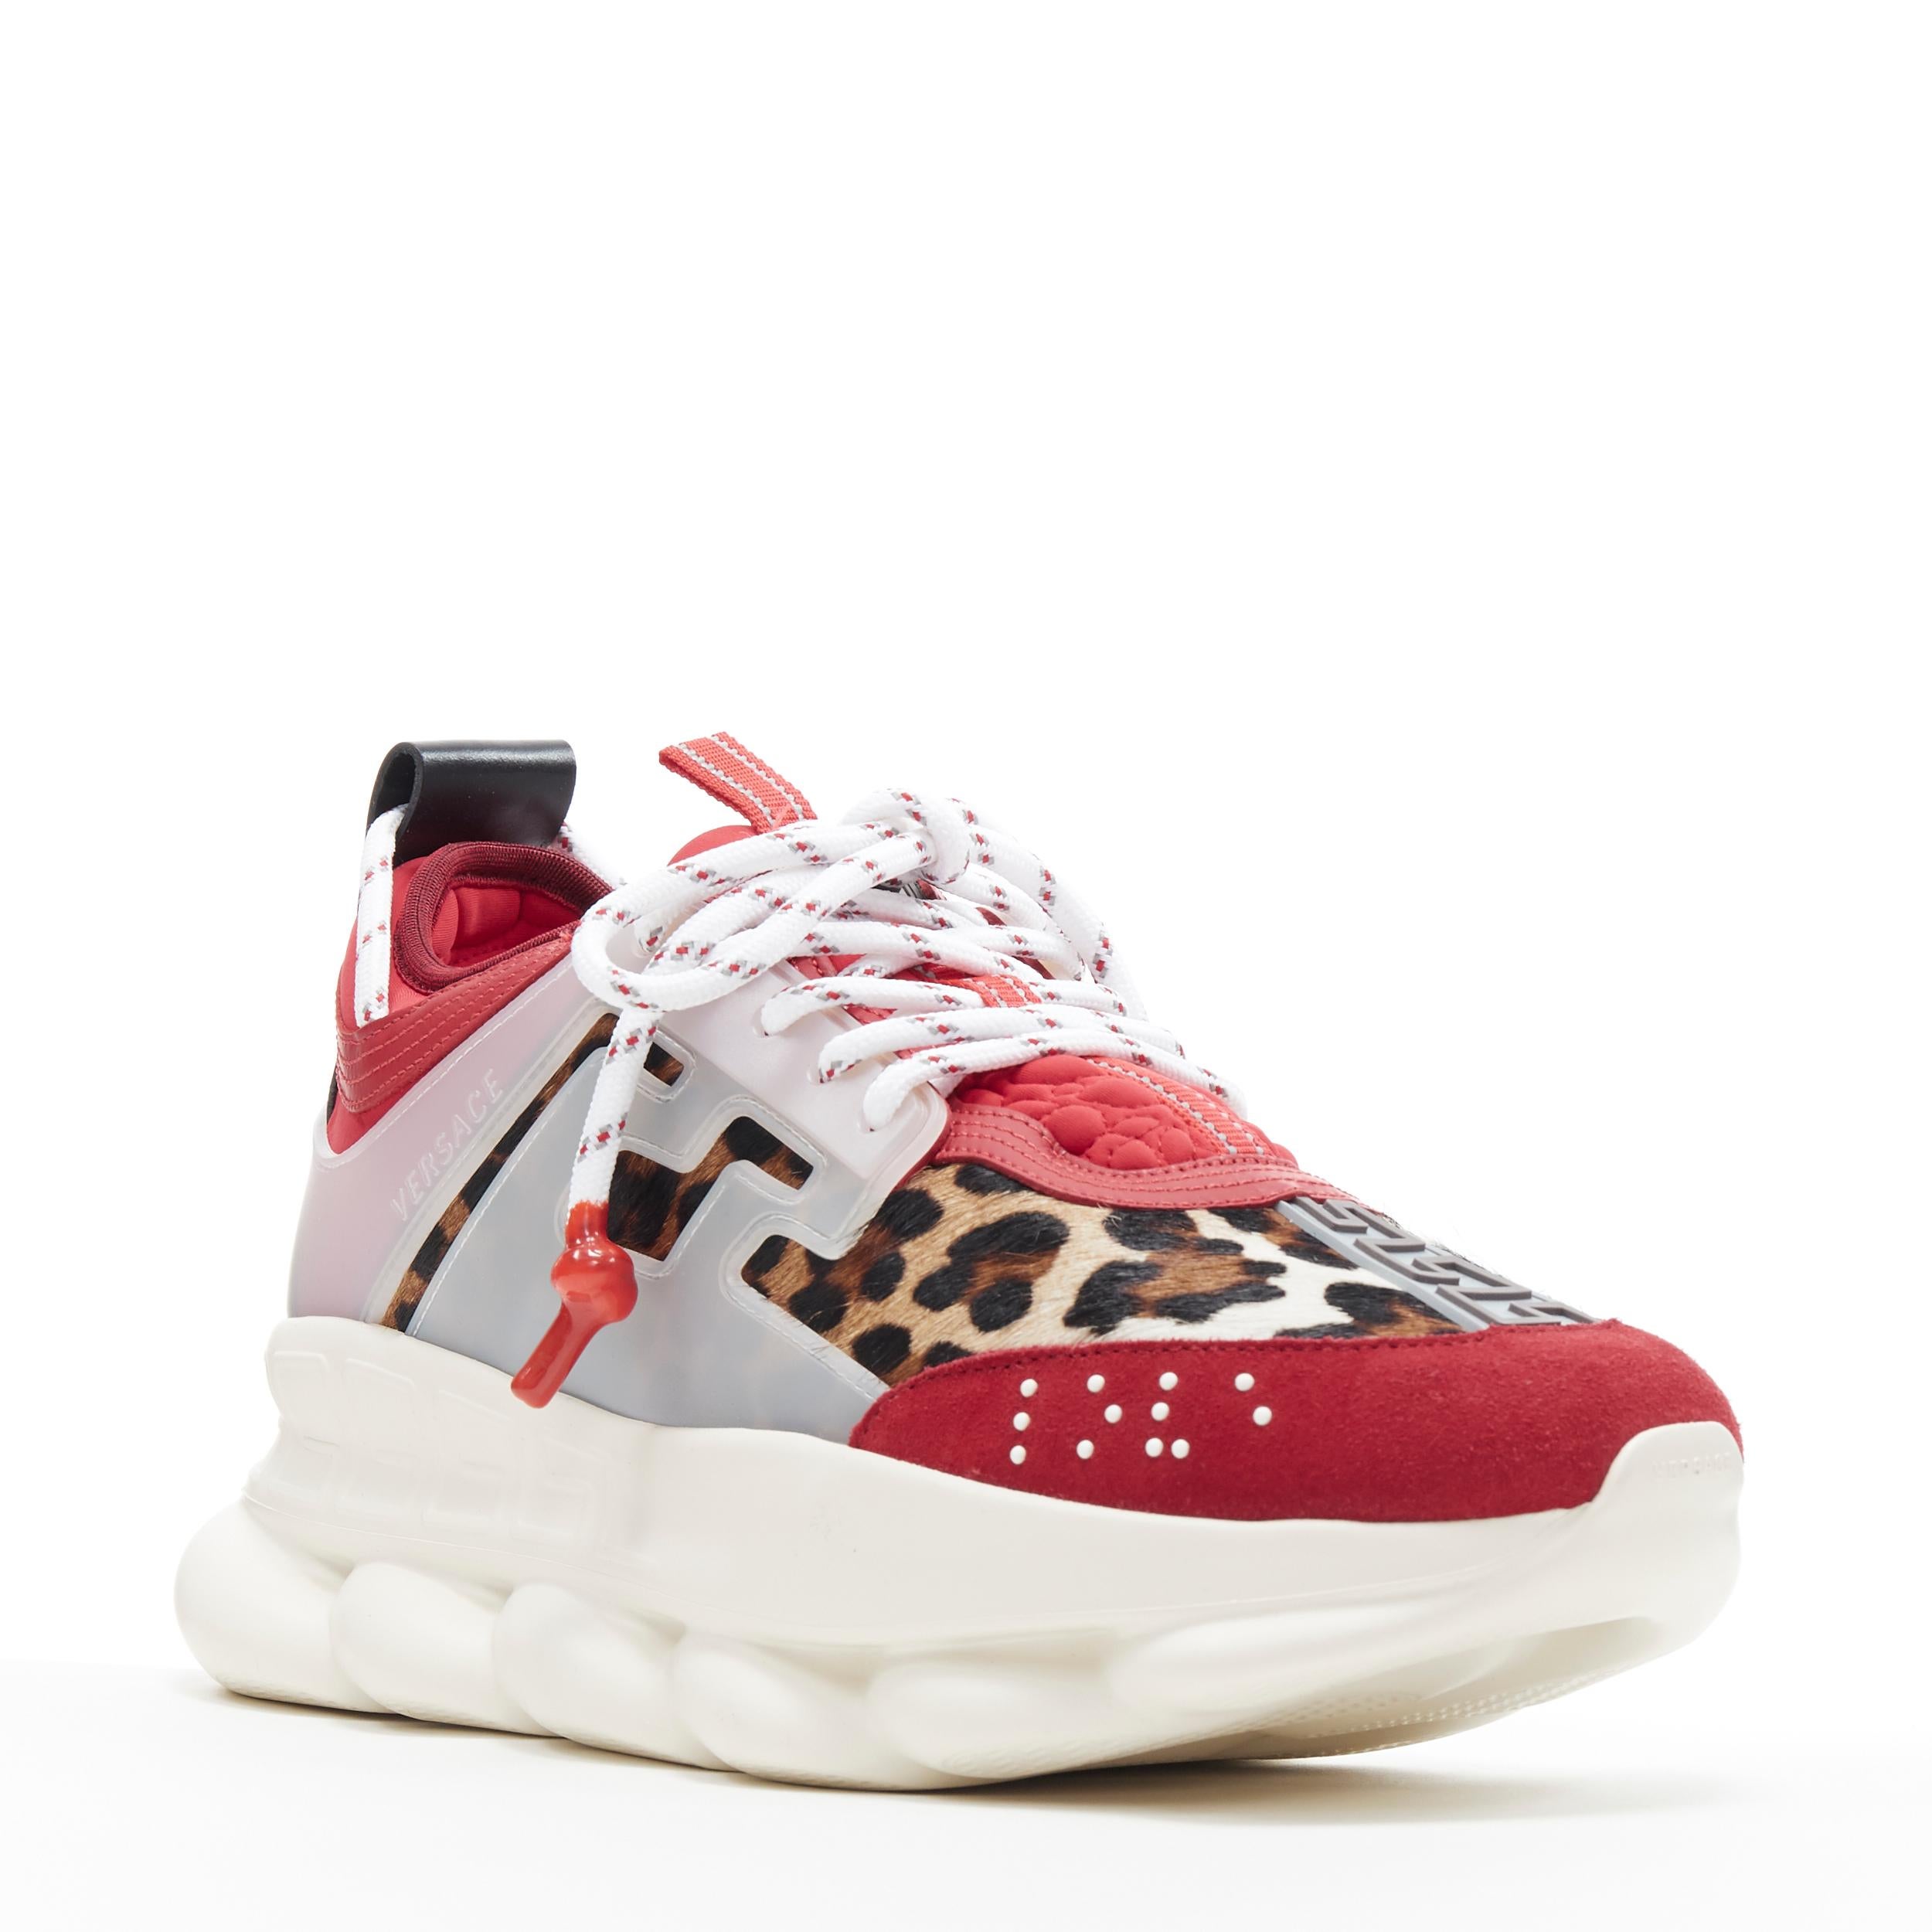 new VERSACE Chain Reaction Red Wild Leopard low chunky sneaker EU38 US5 
Reference: TGAS/B00288 
Brand: Versace 
Designer: Salehe Bembury 
Model: Chain Reaction Red Leopard 
Material: Leather 
Color: Red 
Pattern: Leopard 
Closure: Lace up 
Extra